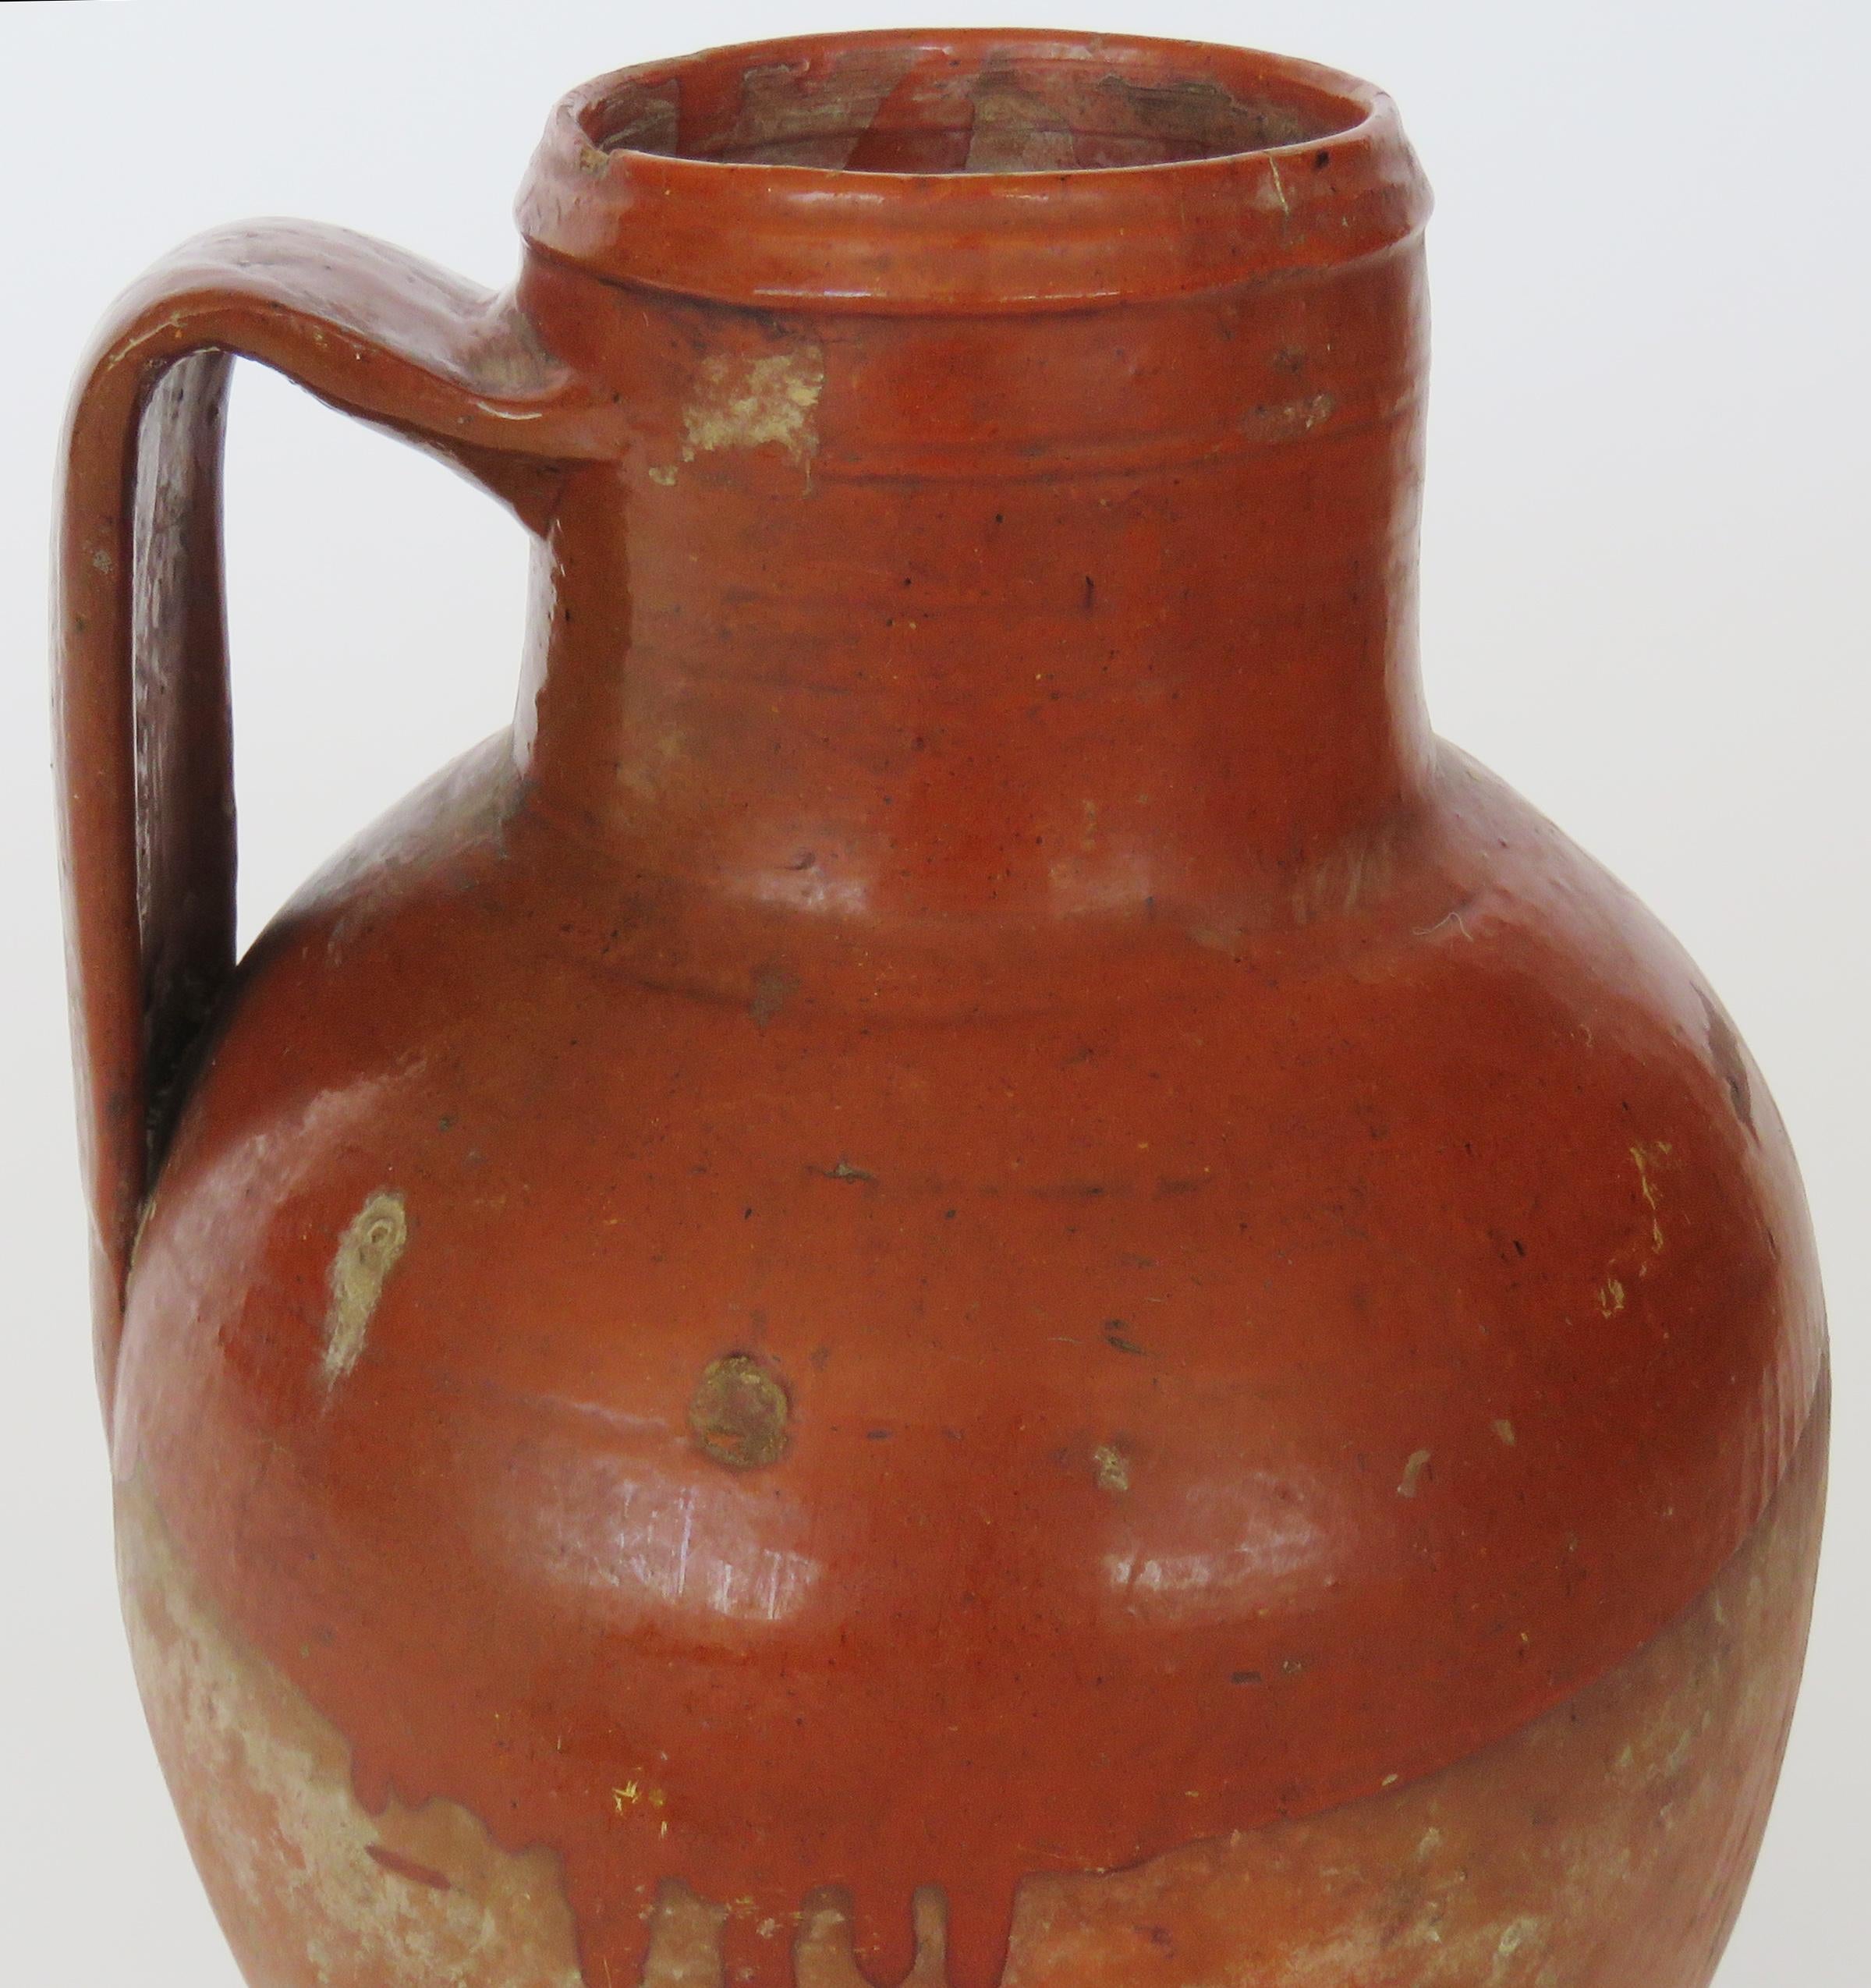 Hand coiled glazed jug with slim neck and large handle.